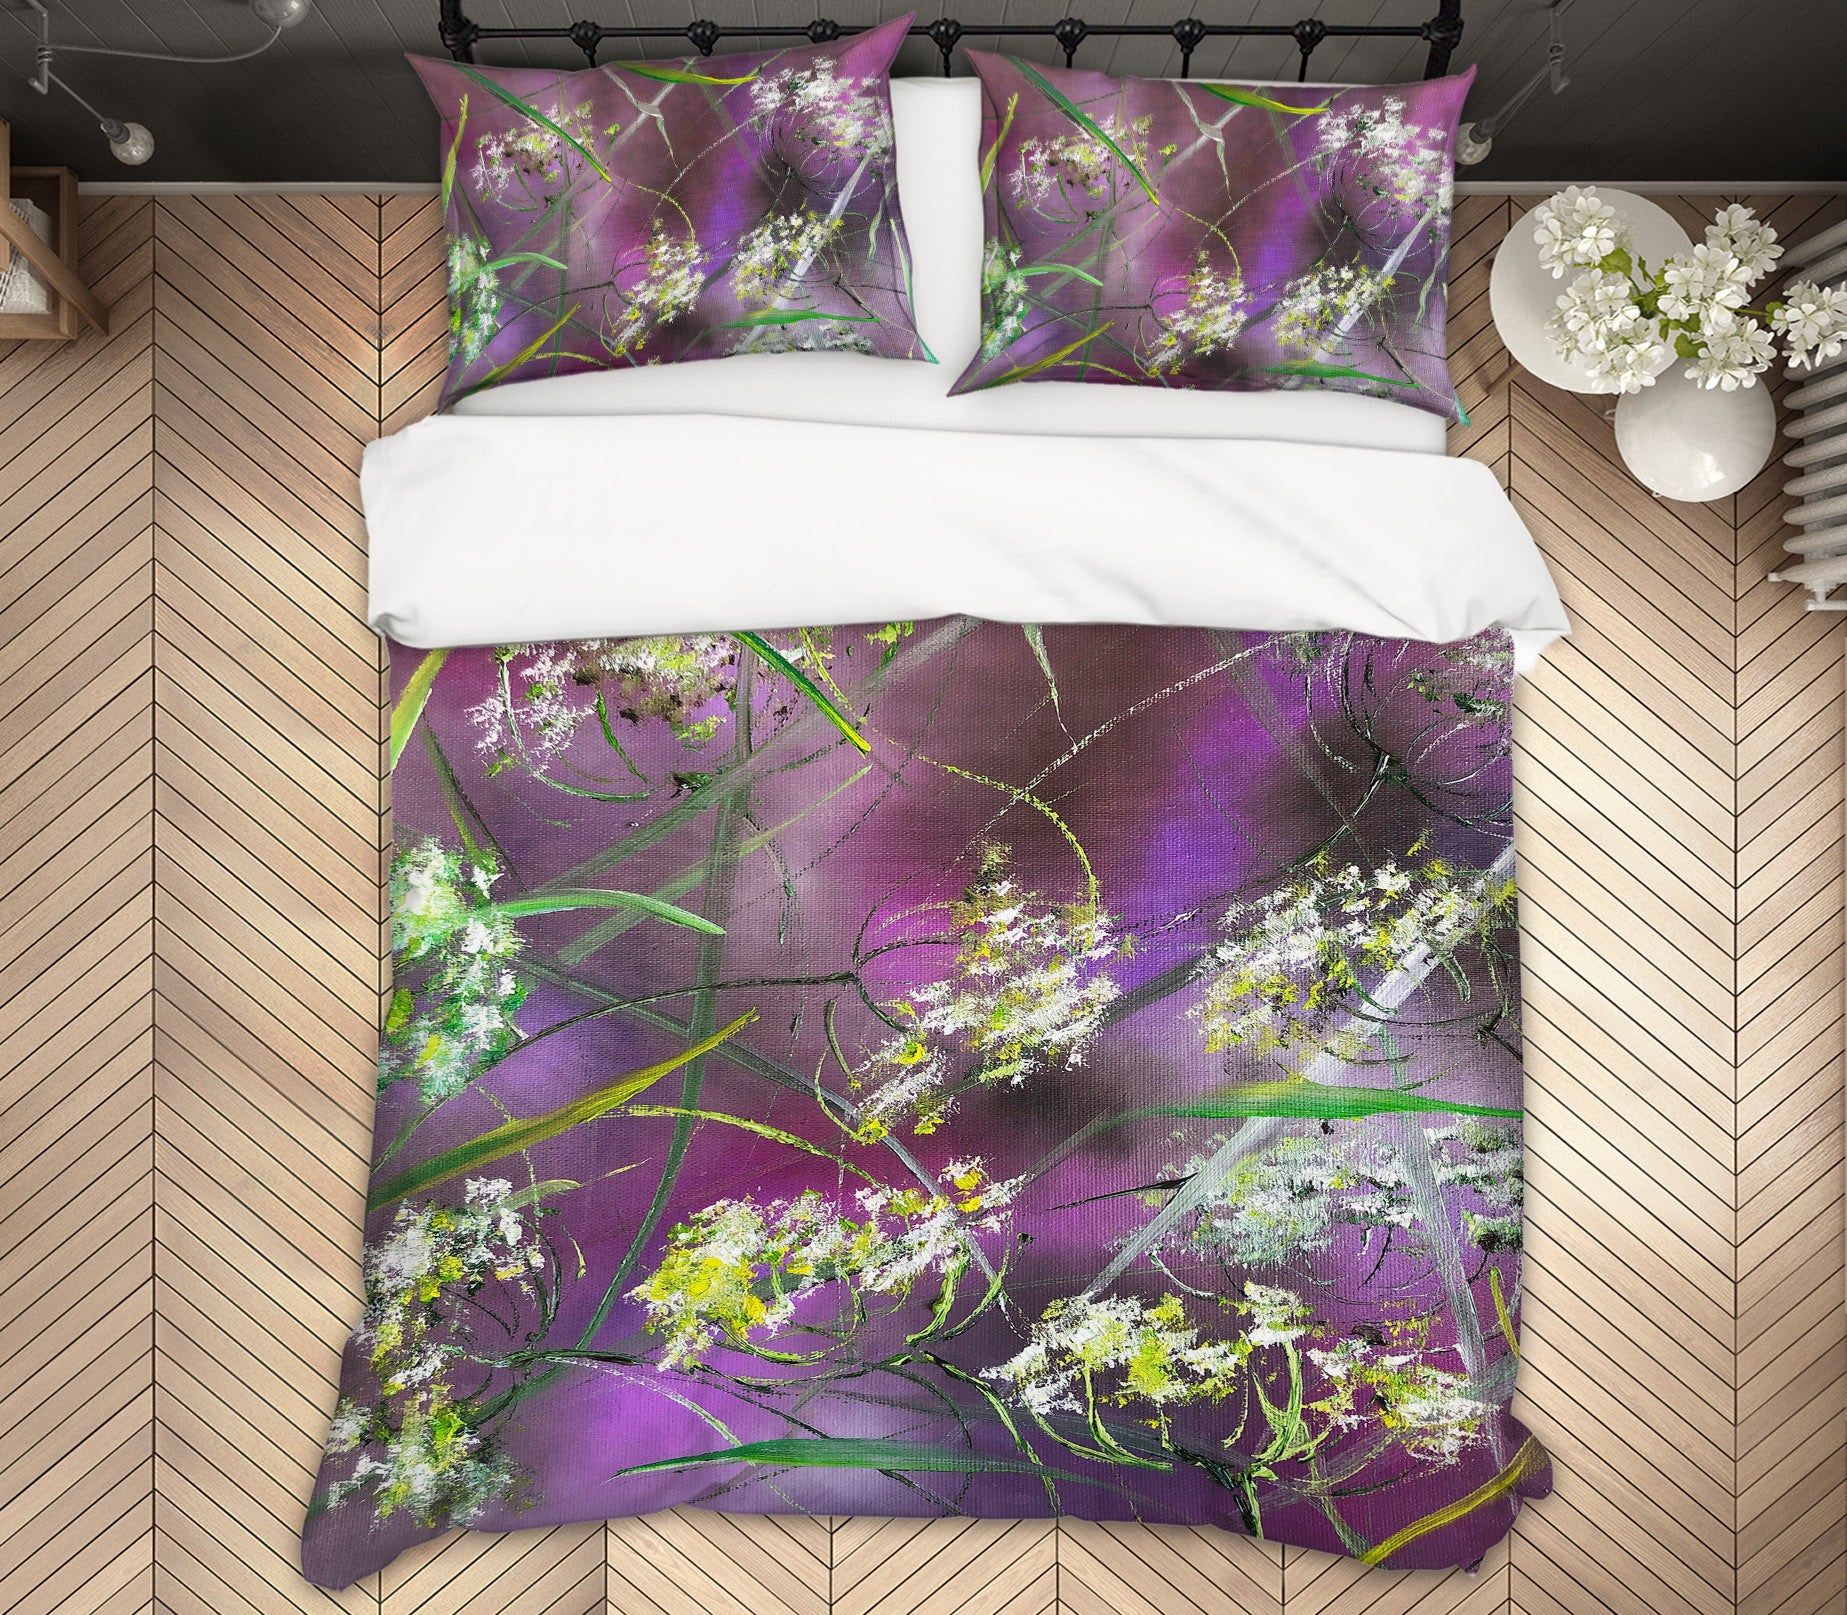 3D Painted Wildflowers 539 Skromova Marina Bedding Bed Pillowcases Quilt